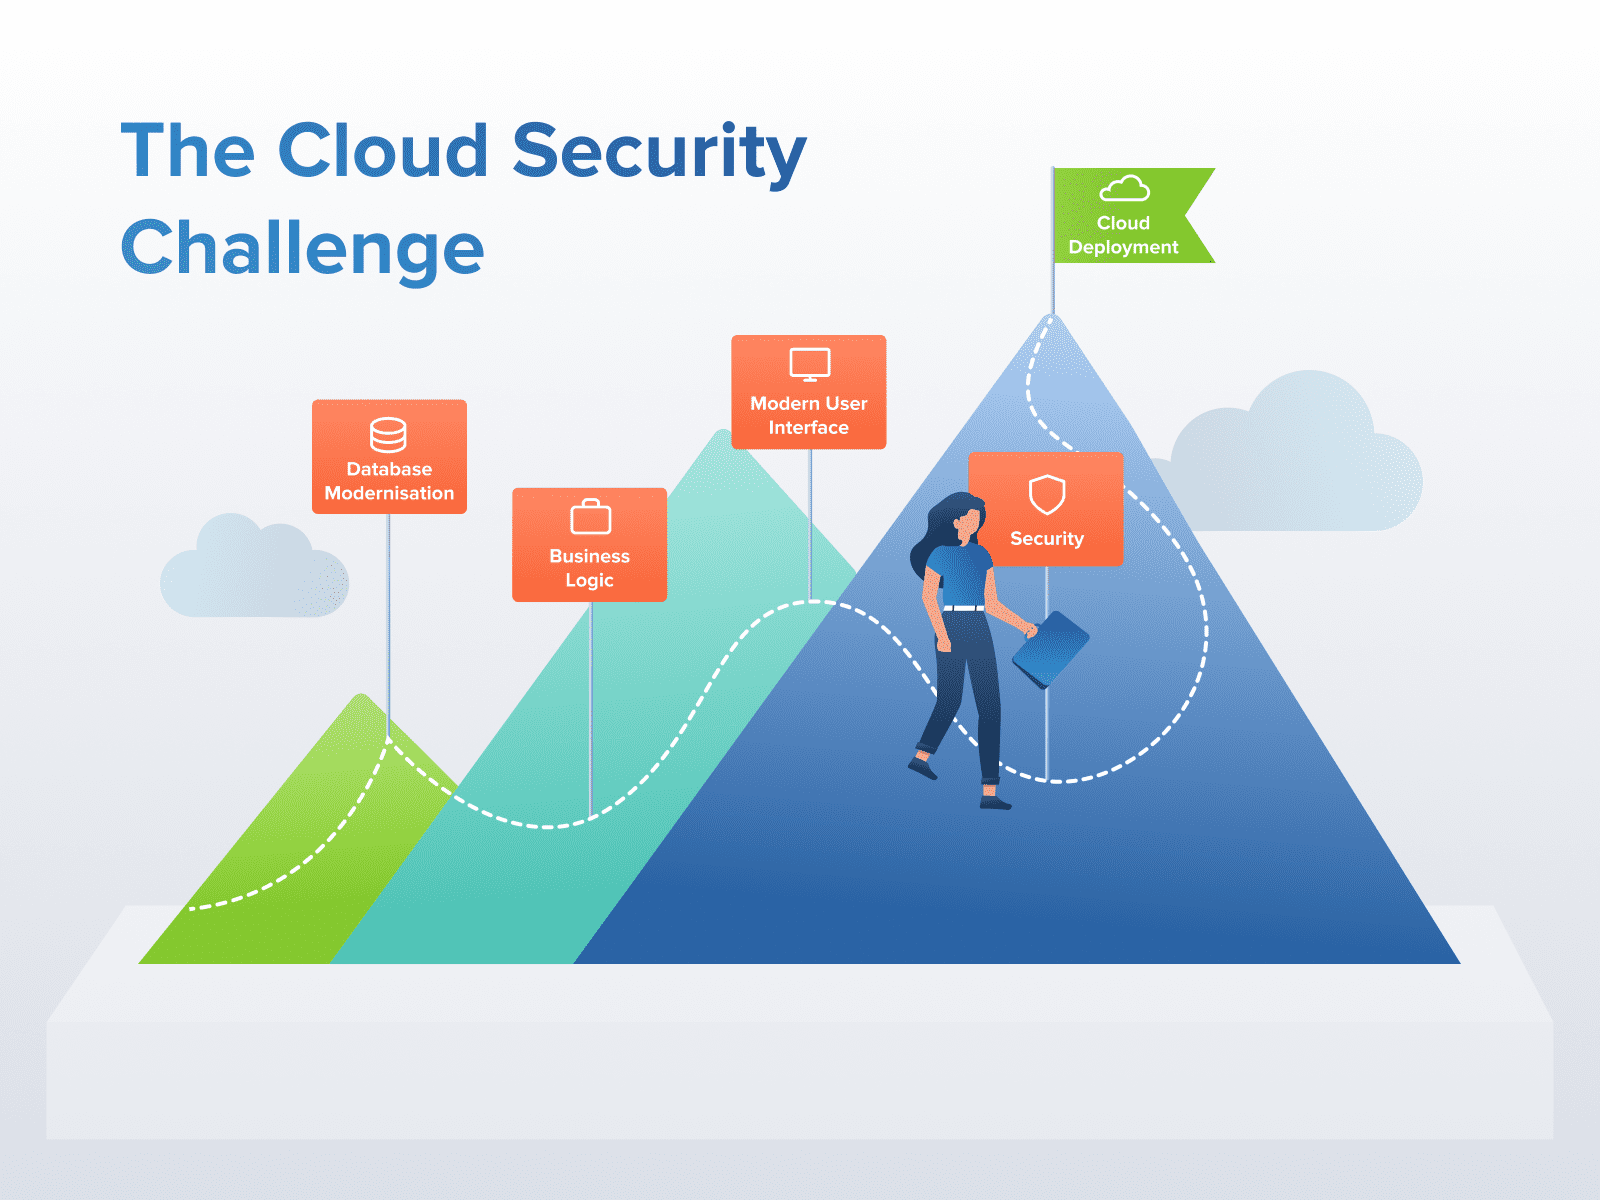 Cloud deployment security risks, implications and prevention measures